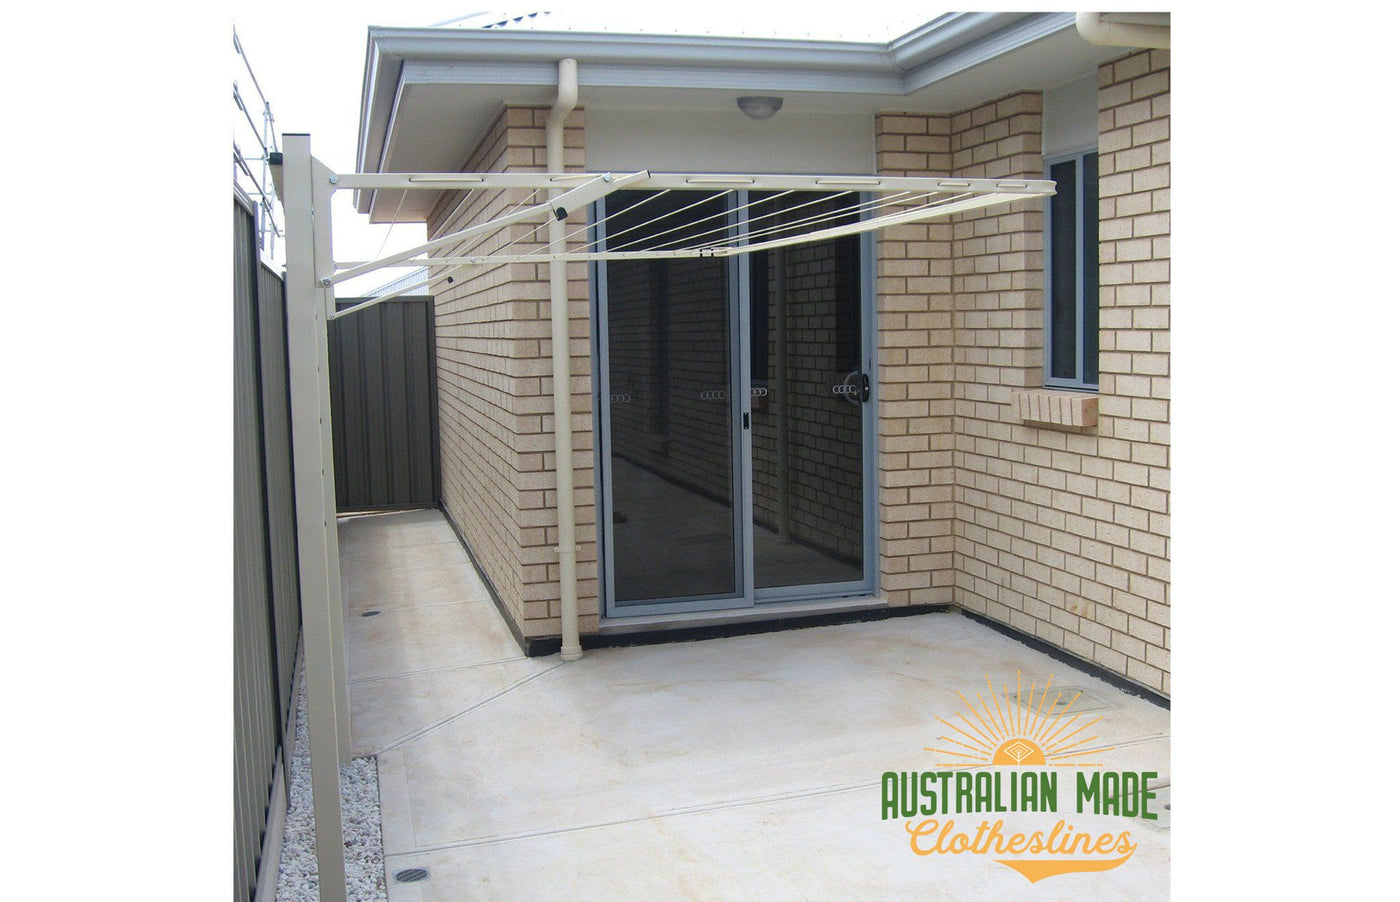 Austral Standard 28 Clothesline - Wall Mounted Installed - Australian Made Clotheslines